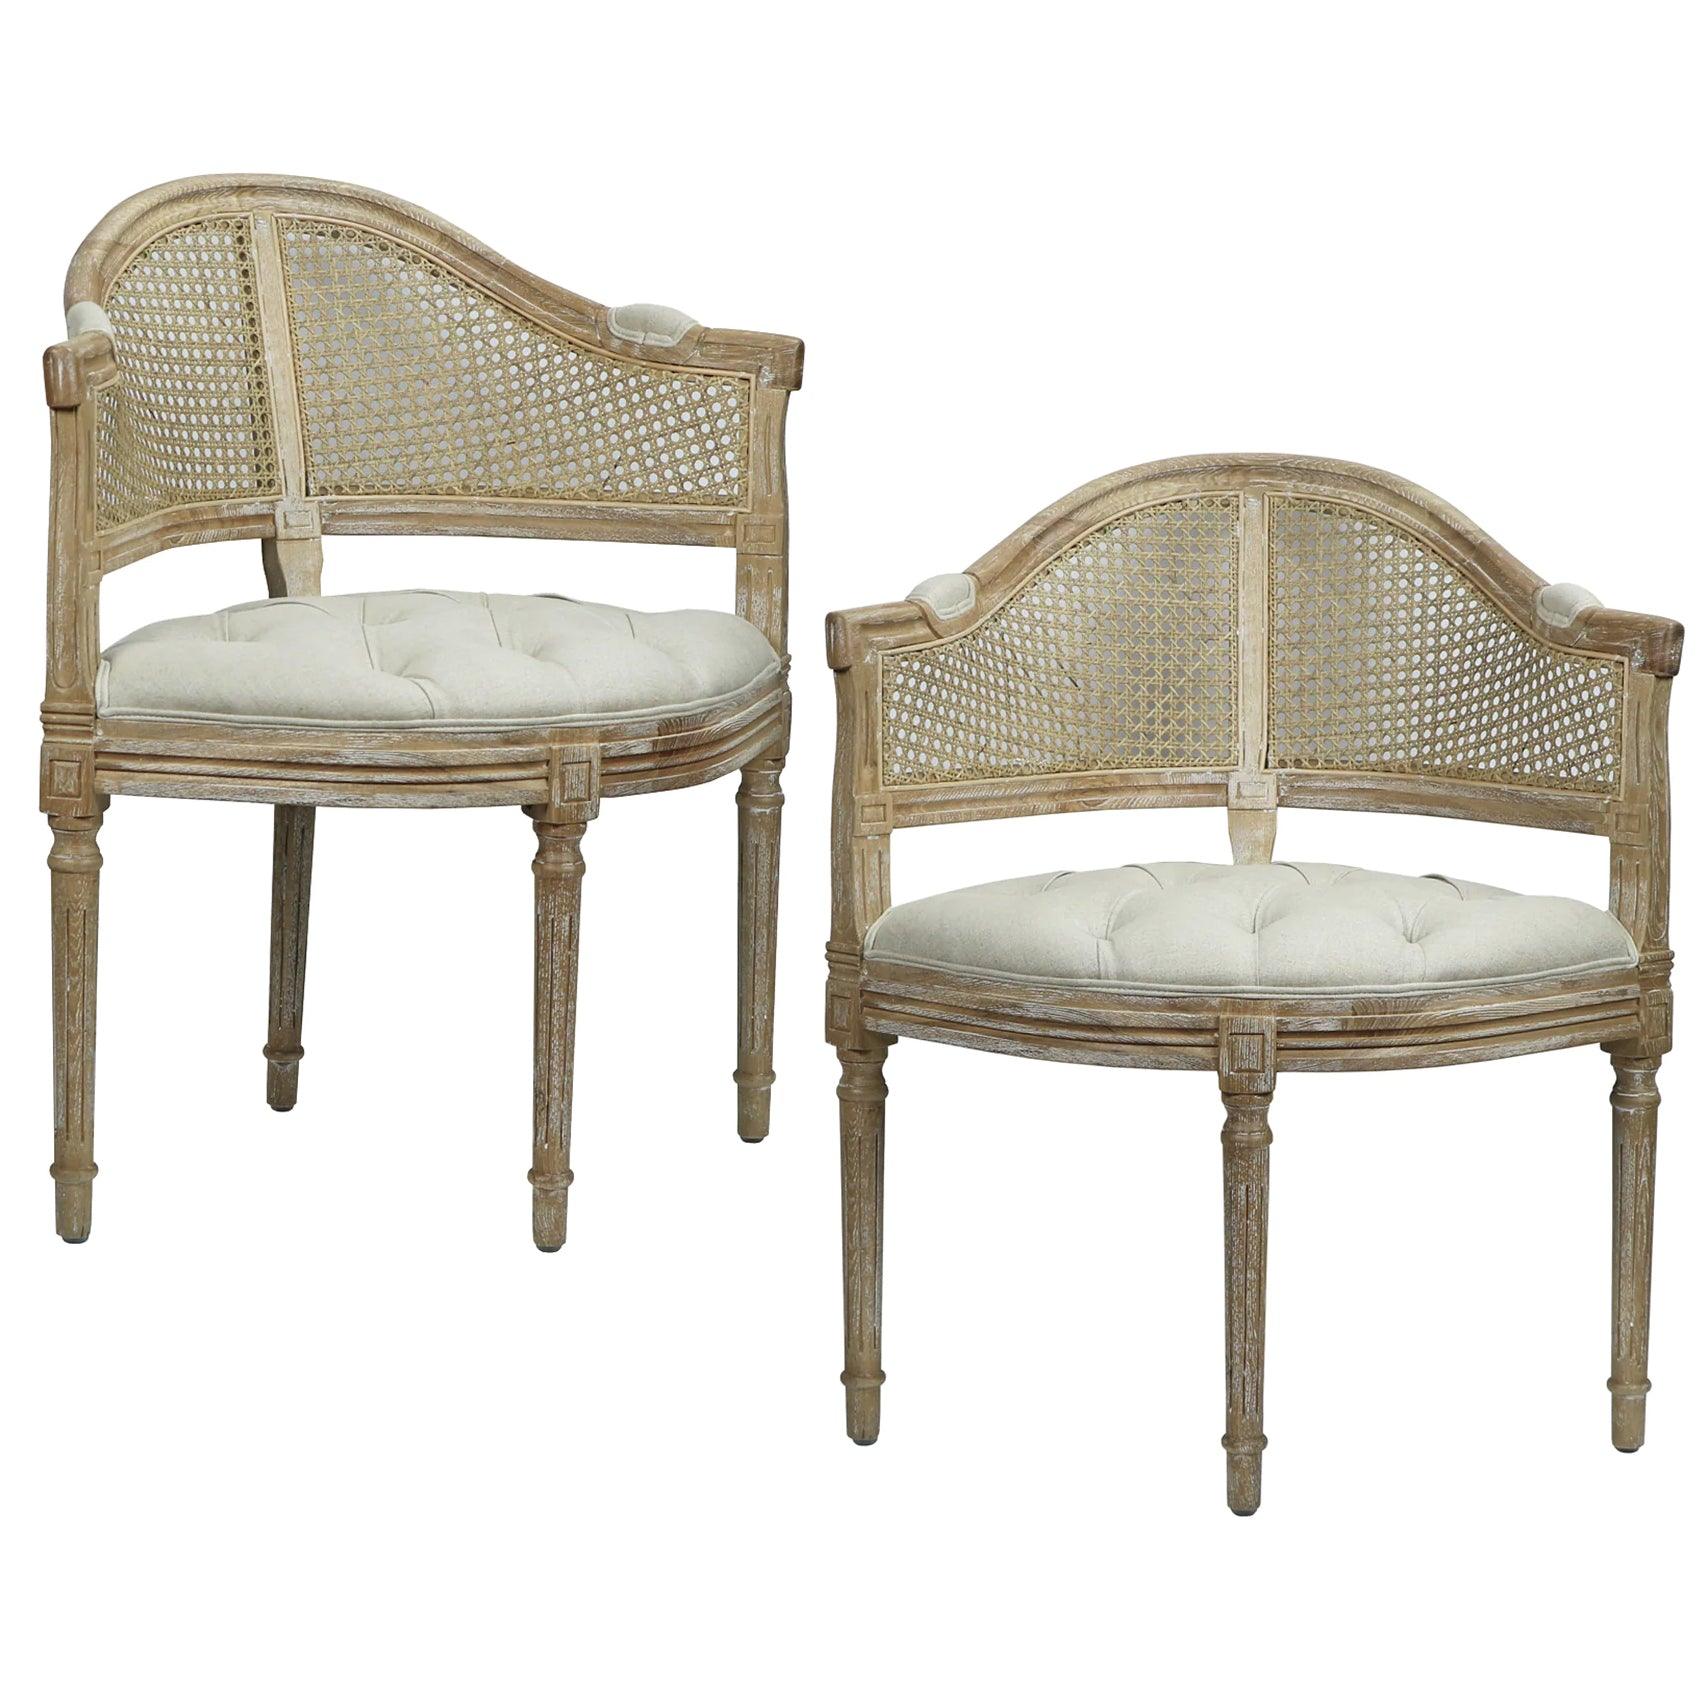 Curved Cane Back Corner Chairs - Set of 2 - Belle Escape